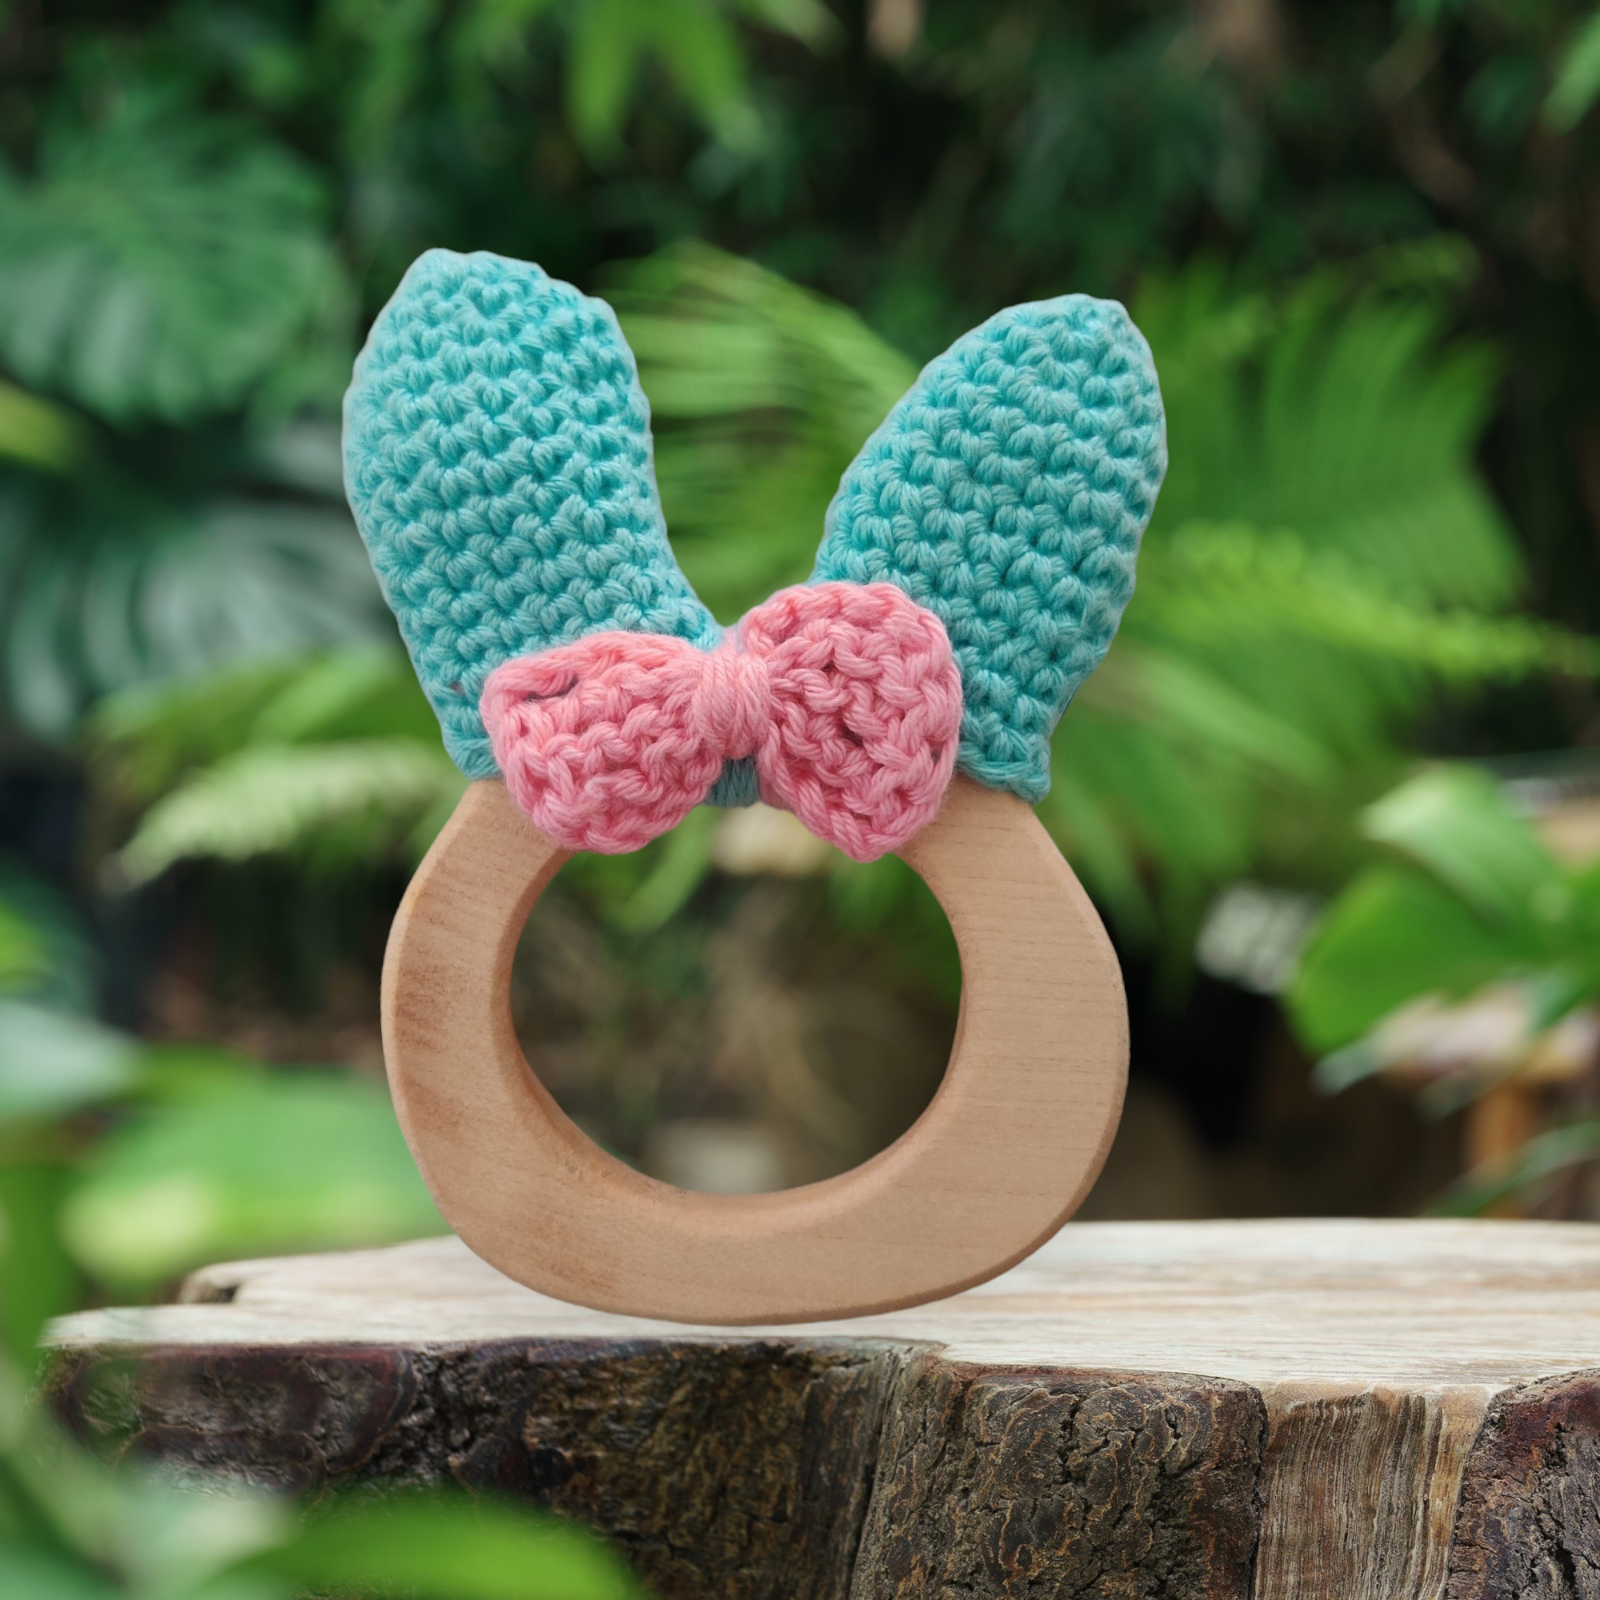 "Organic Crochet Wooden Teether: Eco-Friendly Baby Teething Toy for Natural Relief"